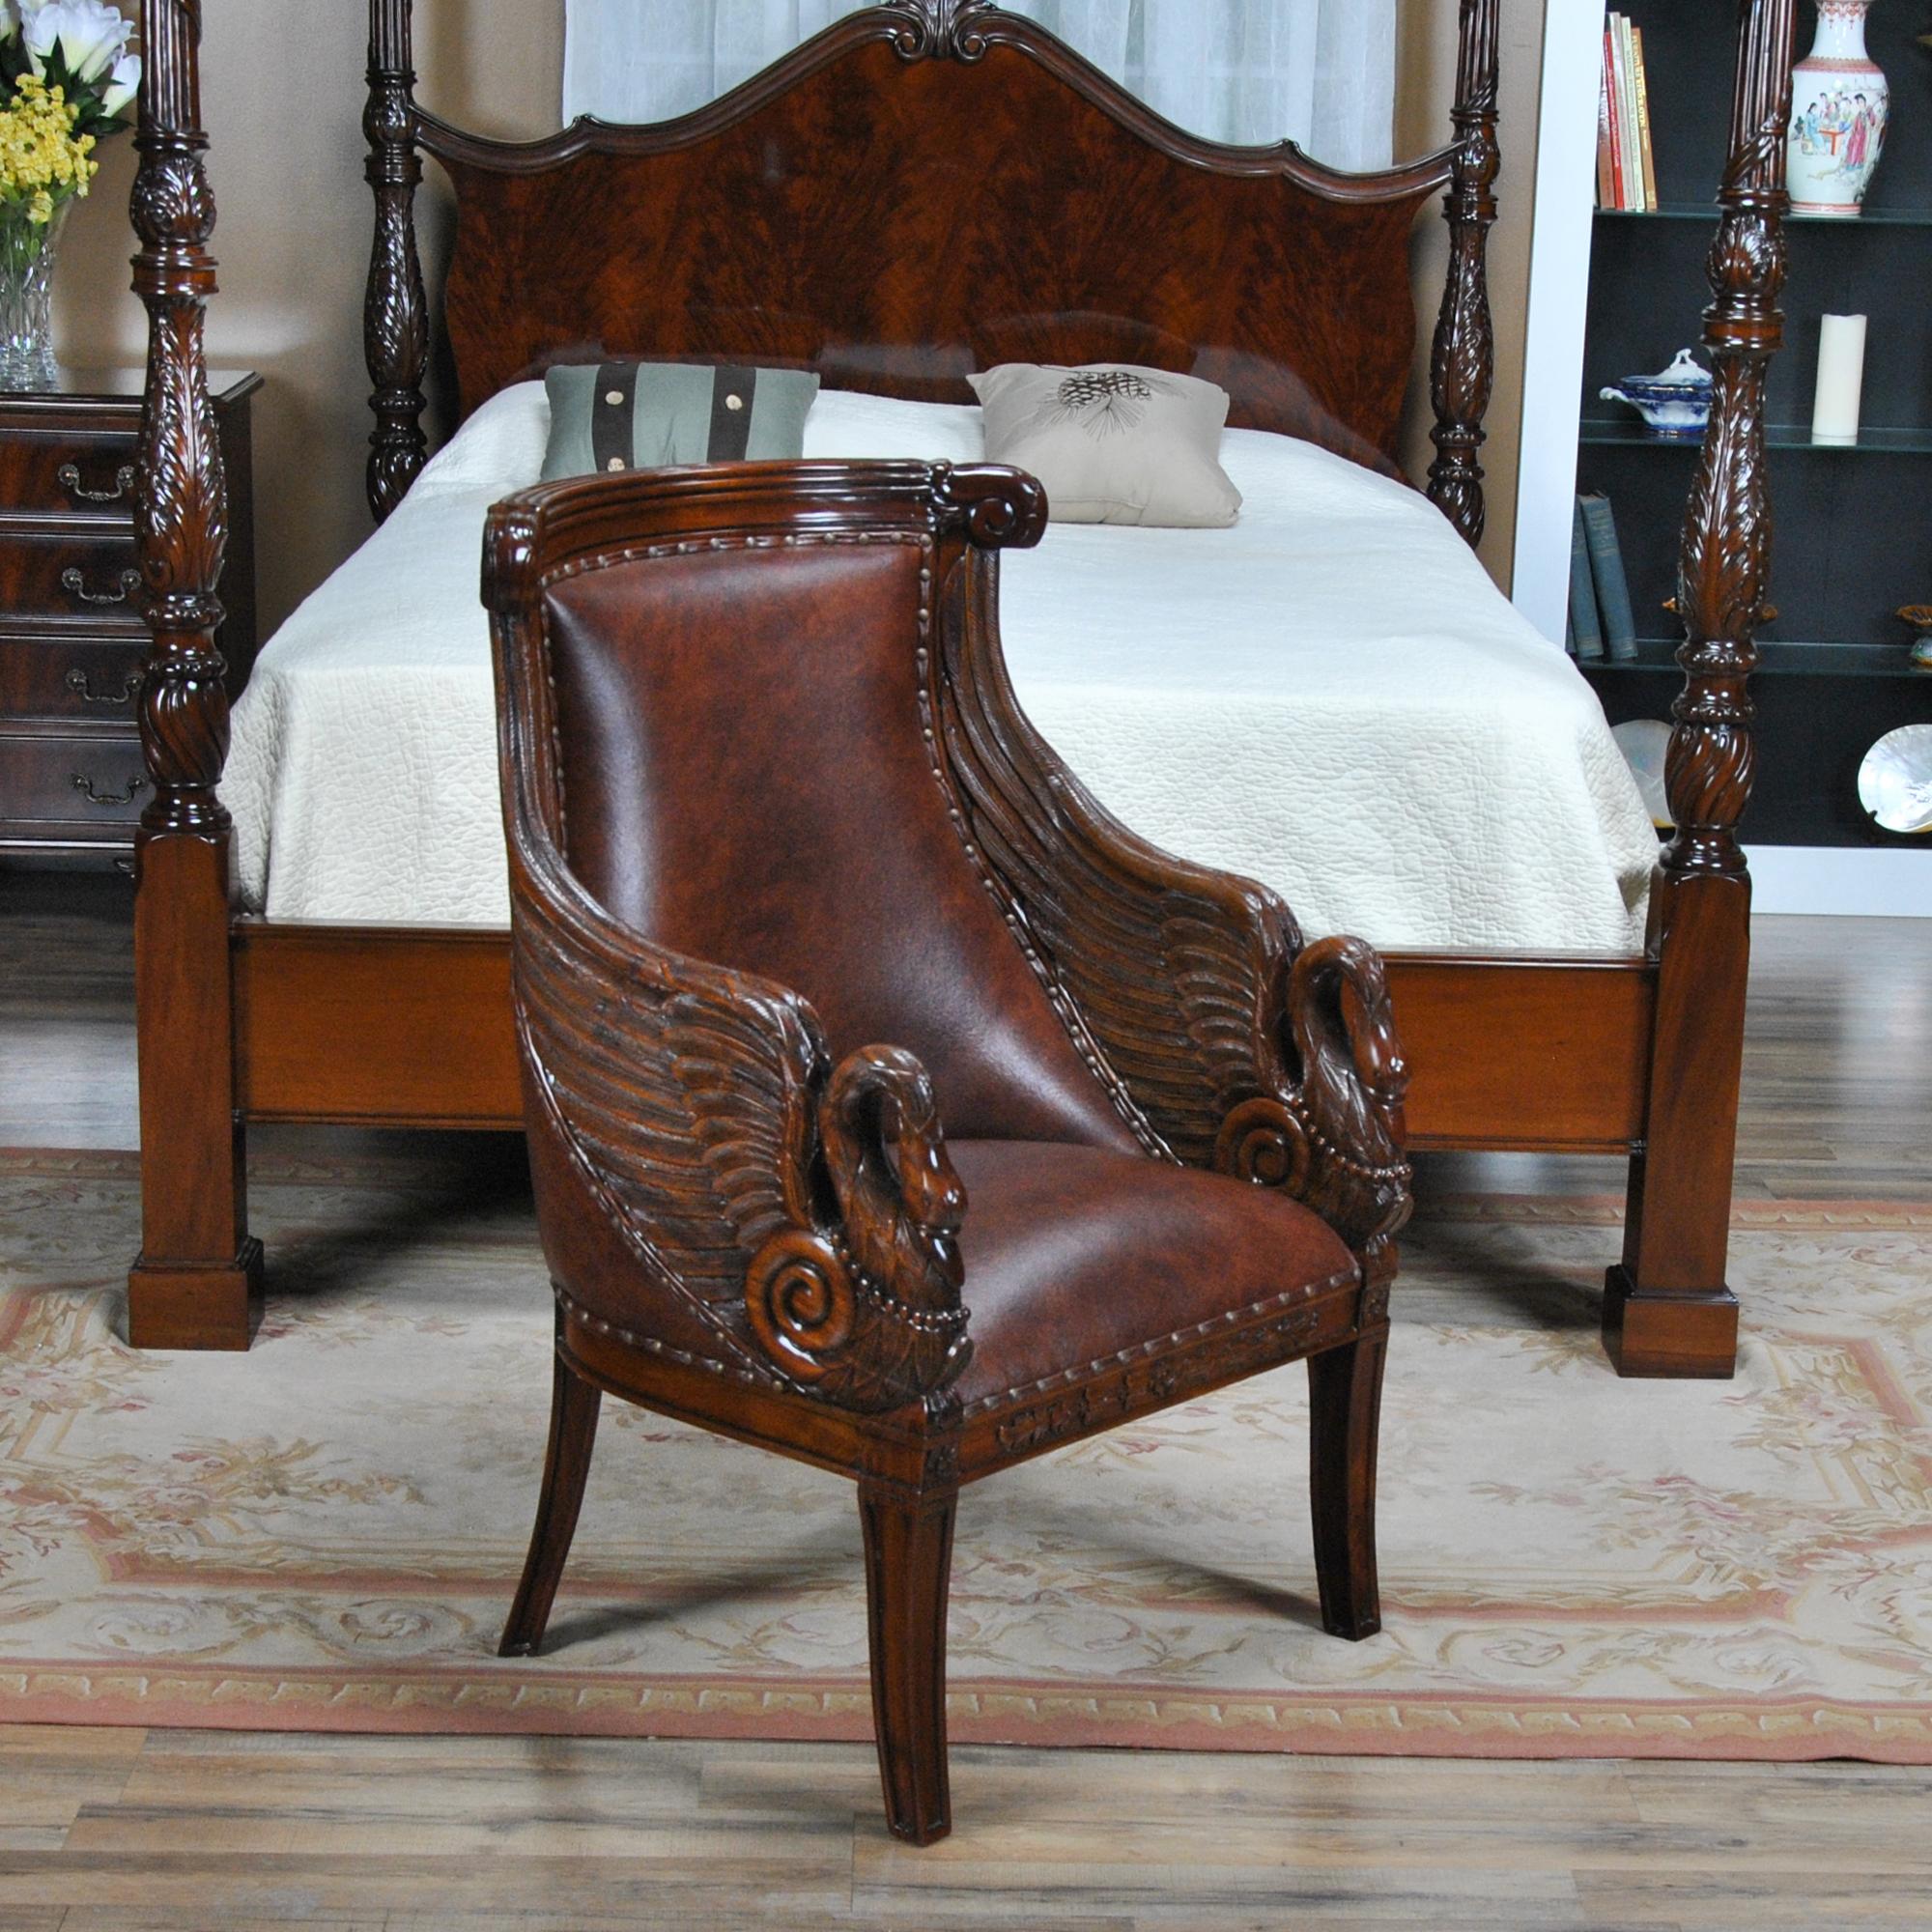 This high end Leather Swan Arm Chair from Niagara Furniture is impressive with solid mahogany hand carved details as well as the full grain genuine leather upholstery. A great designer look with a solid and comfortable frame. Inspired by an antique